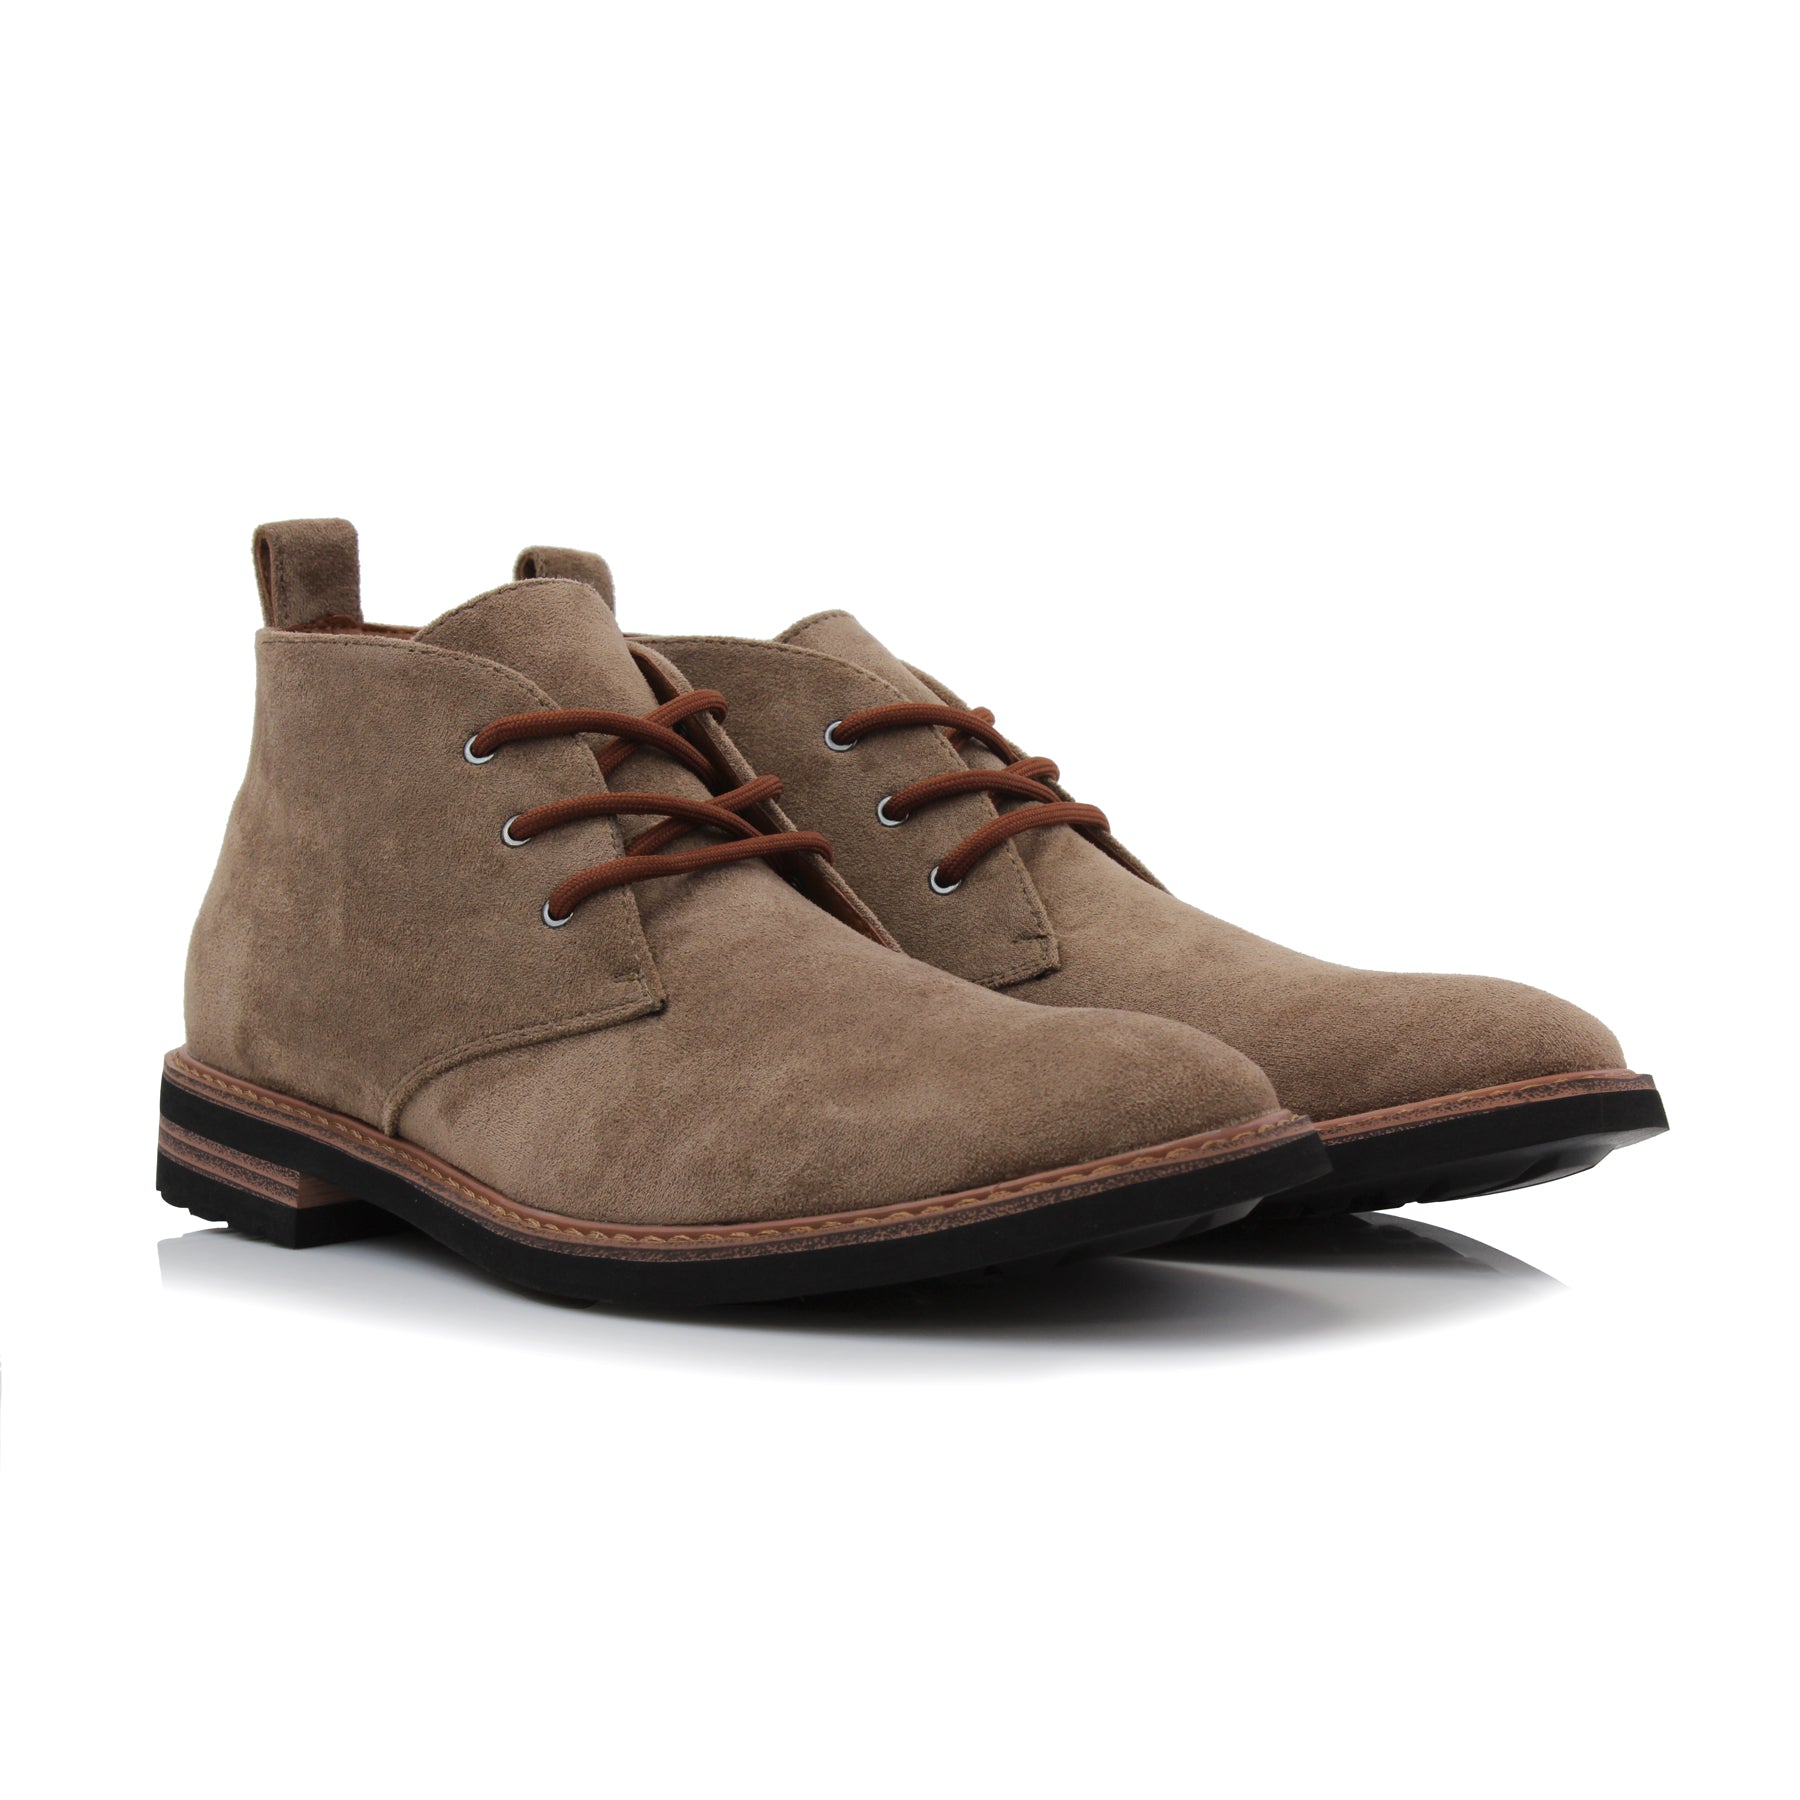 Suede Chukka Boots | Pablo by Ferro Aldo | Conal Footwear | Paired Angle View